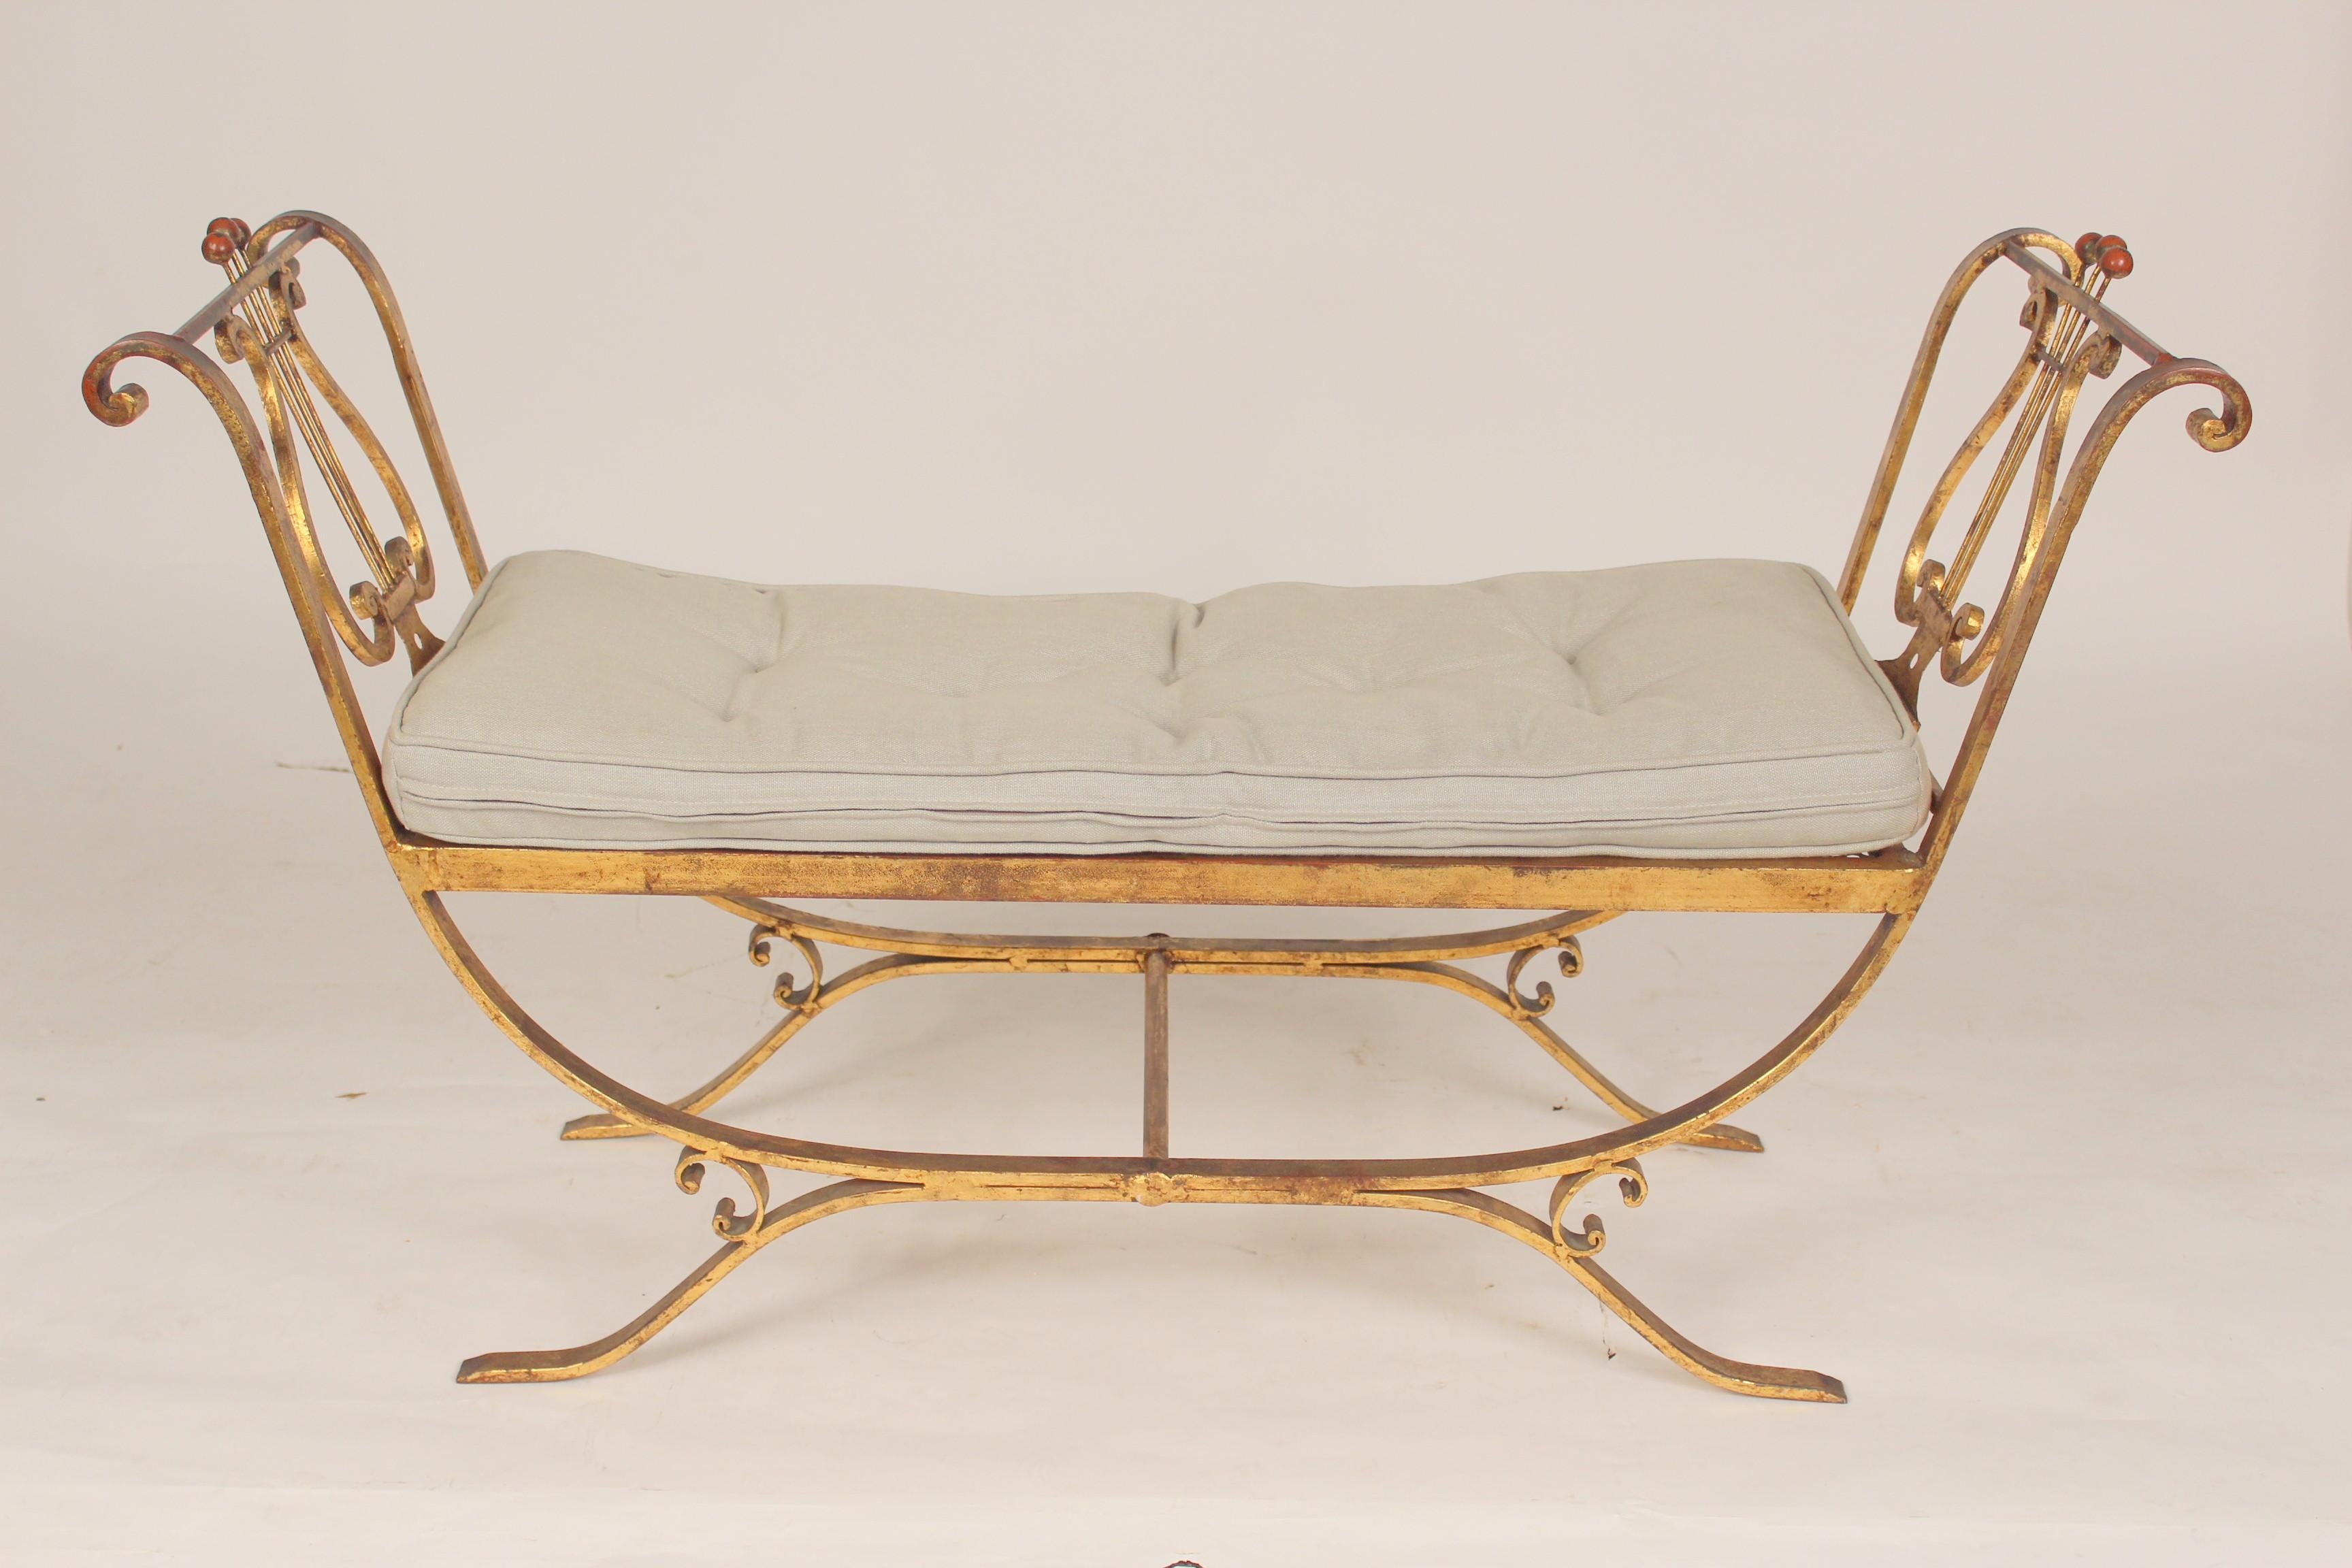 Neo classical style gilt iron bench, circa 1960's. Side arms with lyre shaped design and cushion with button and tuck upholstery.